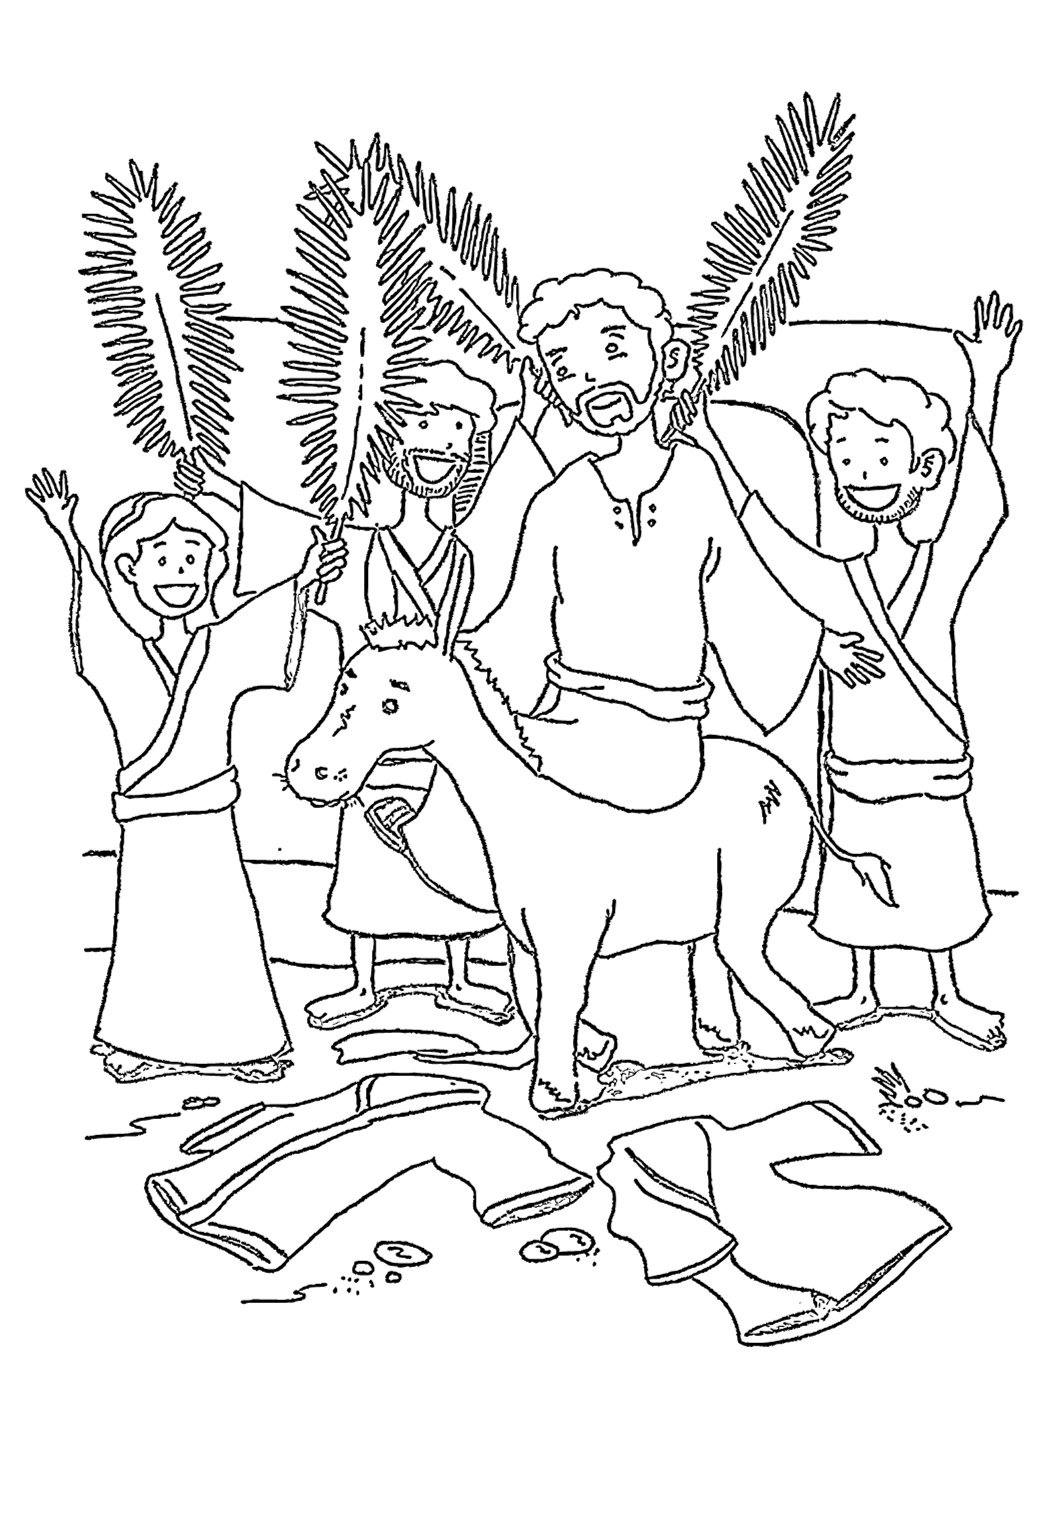 Free printable palm sunday cloth coloring page for adults and kids